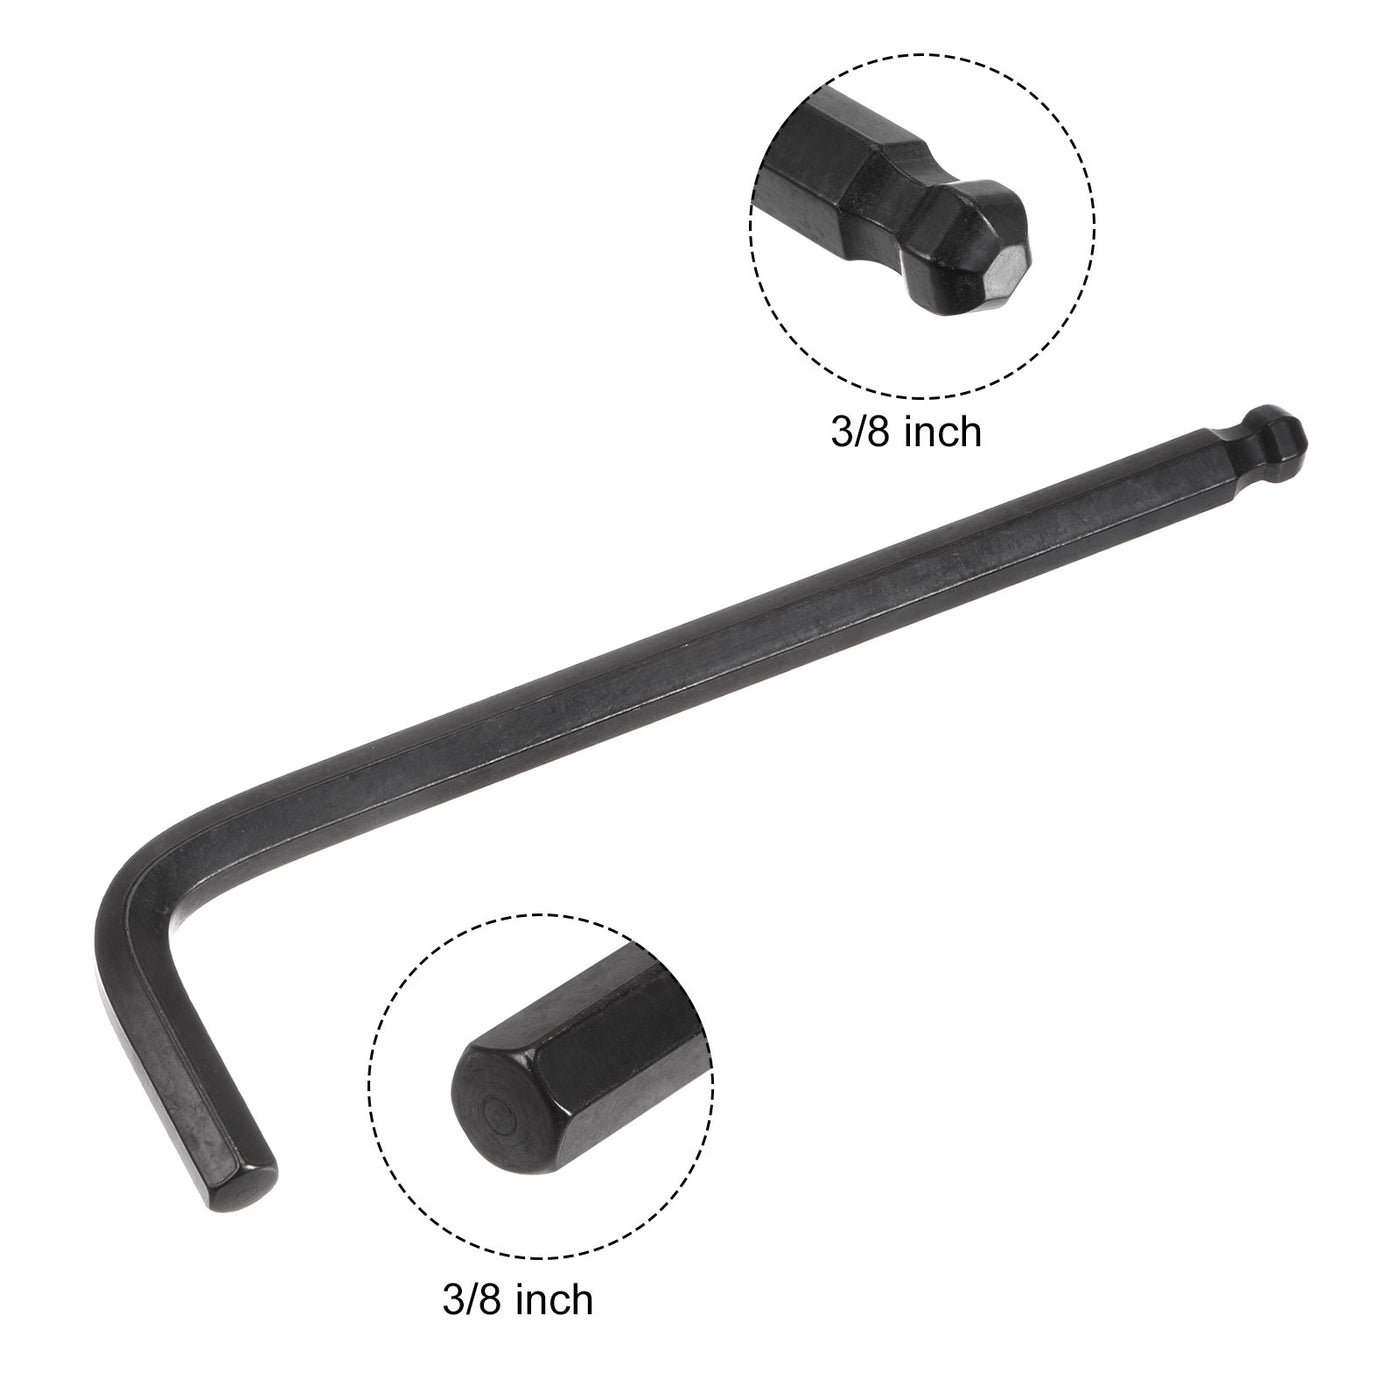 uxcell Uxcell 3/8" Ball End Hex Key Wrench, L Shaped Long Arm CR-V Repairing Tool, Black